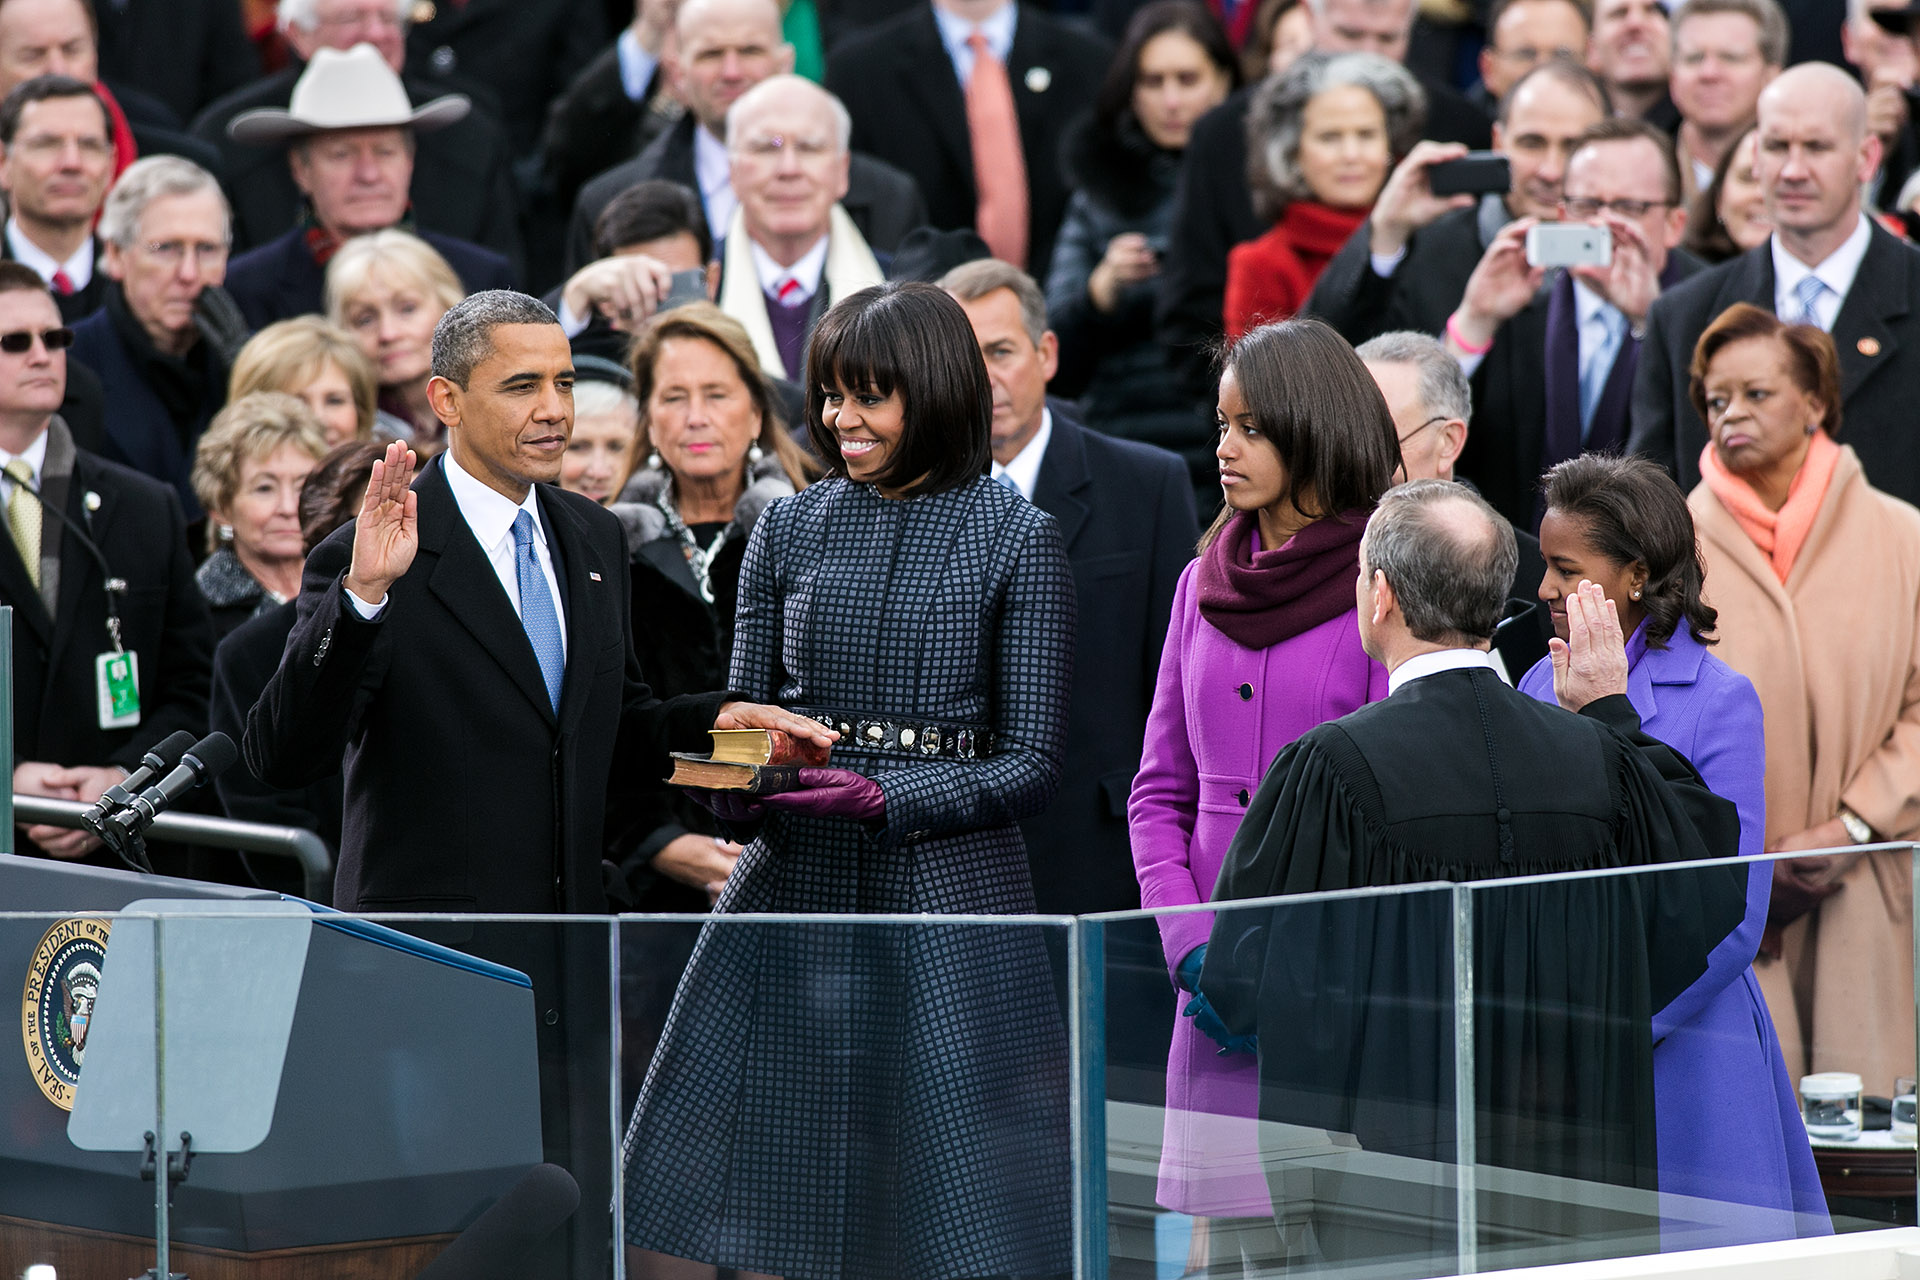 Supreme Court Chief Justice John Roberts administers the oath of office to President Barack Obama (January 21, 2013)